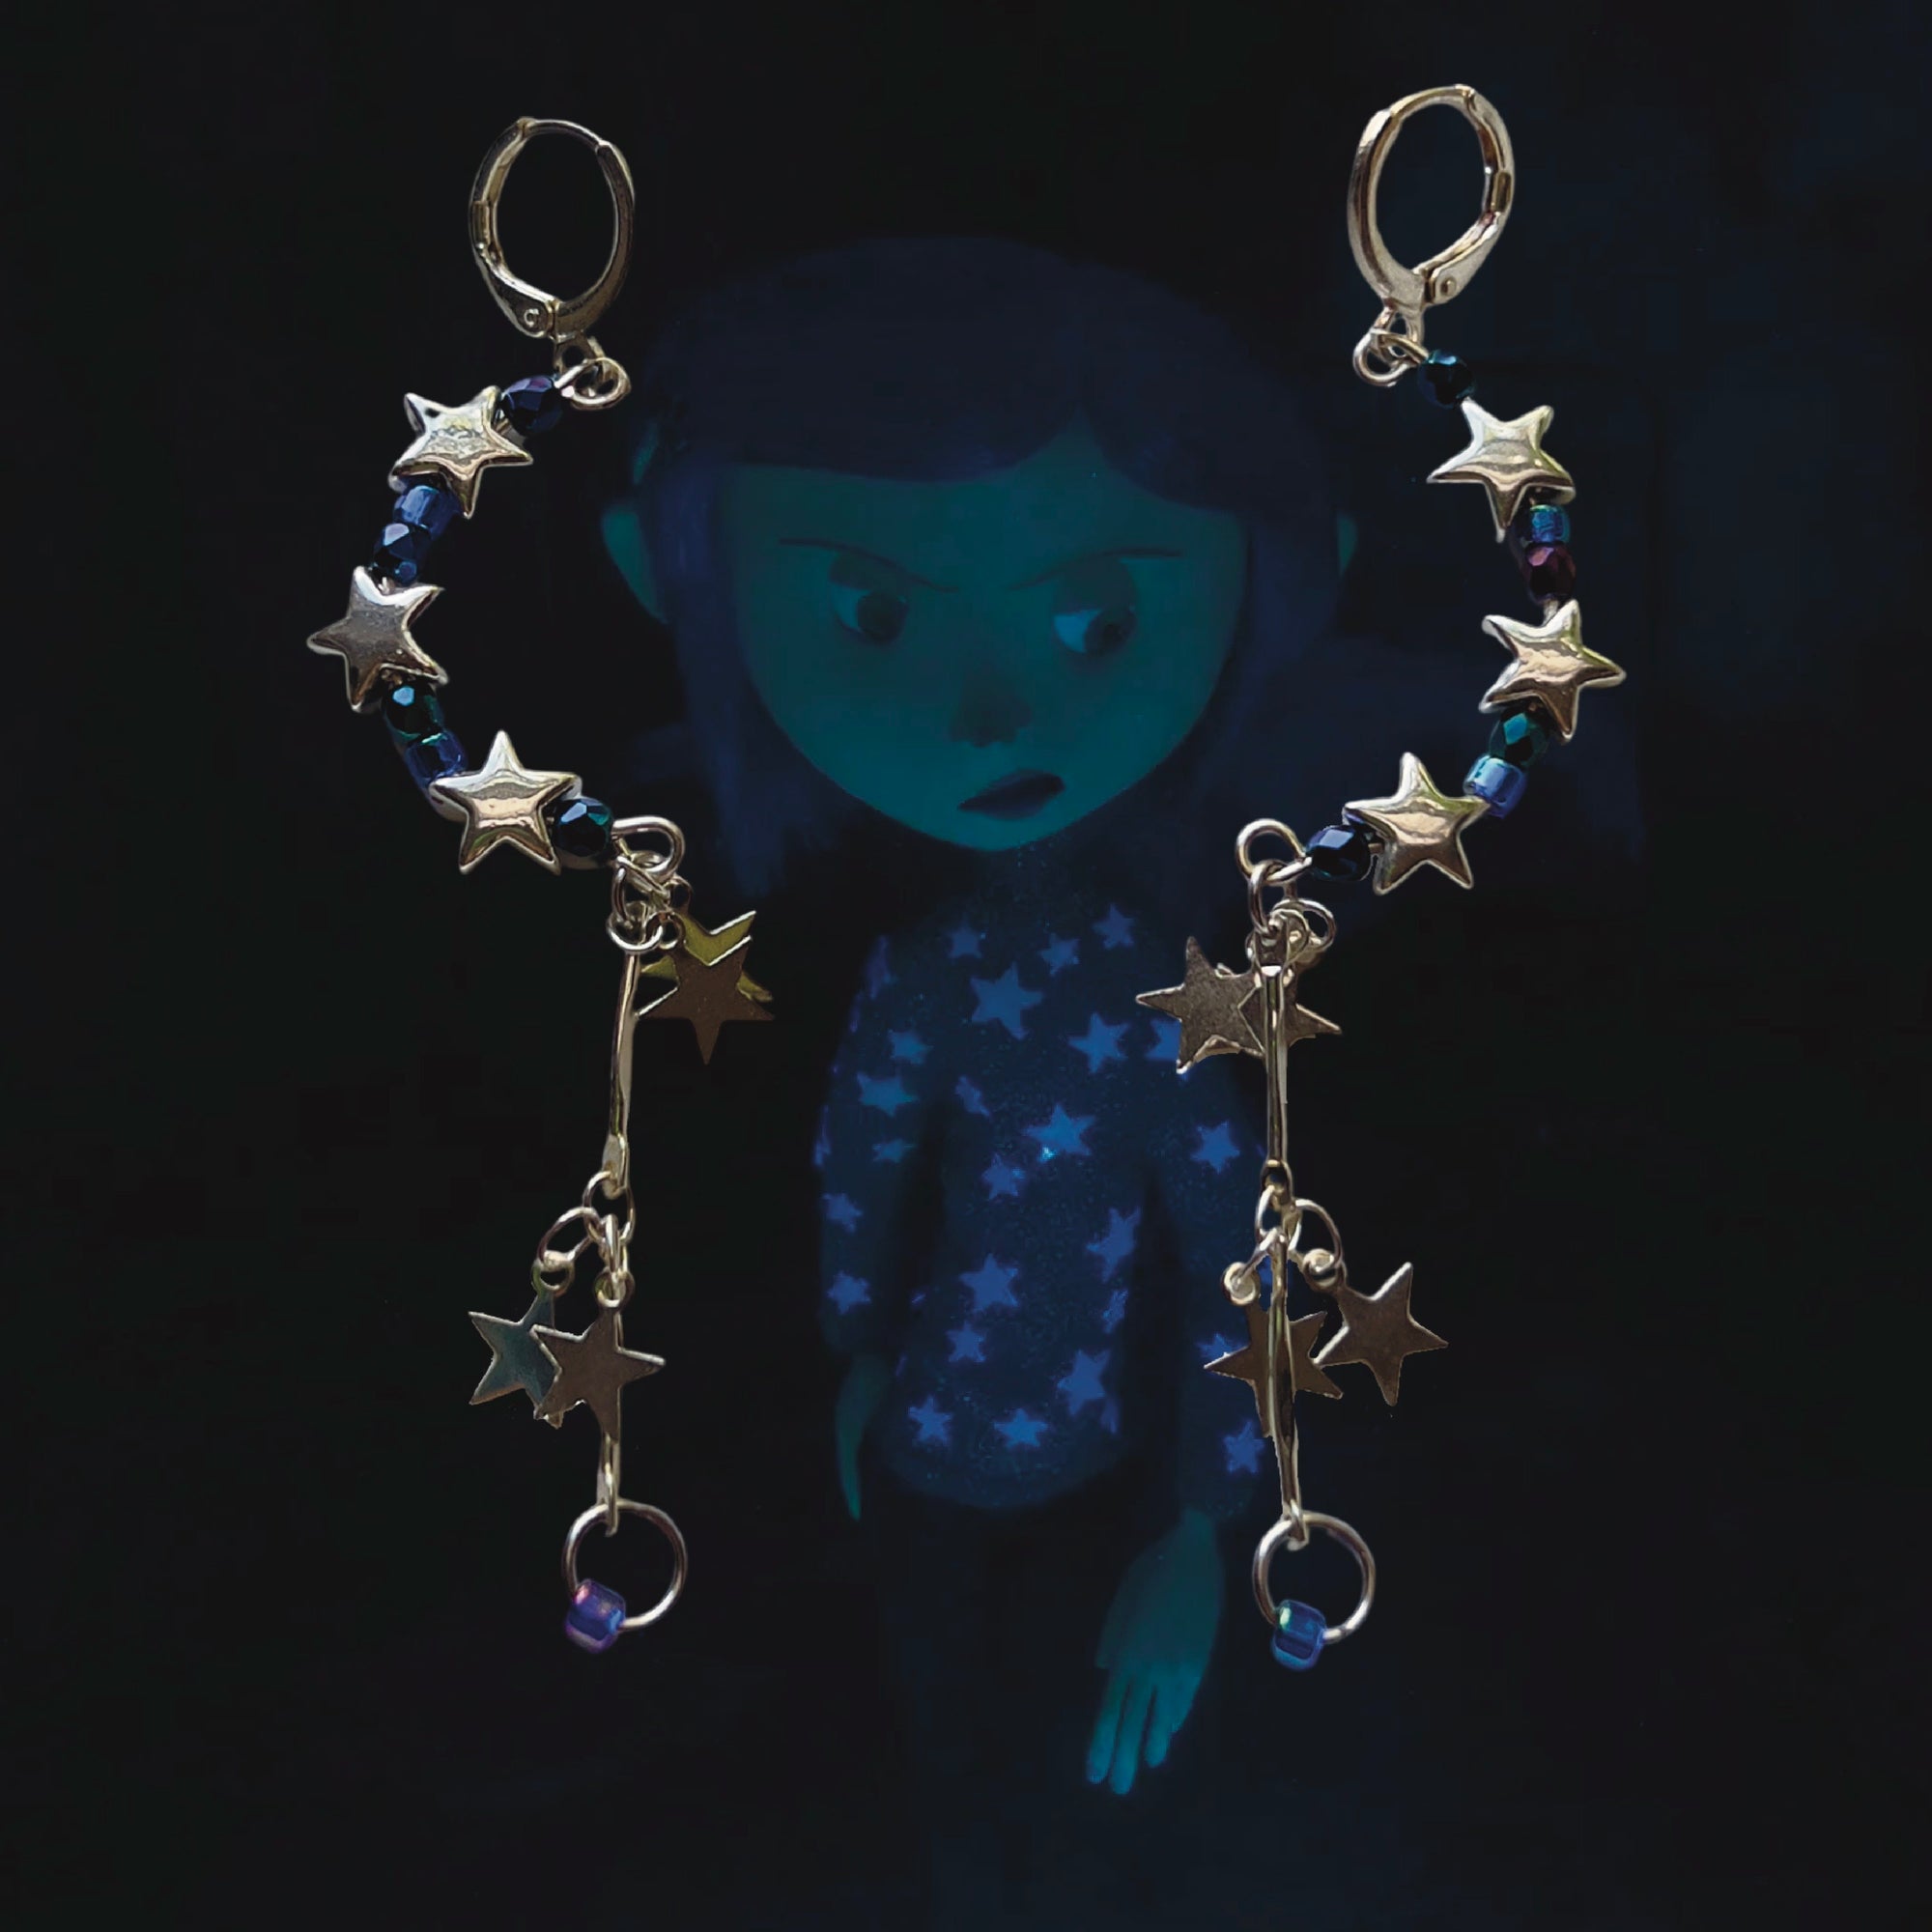 Sky Full of Stars || Coraline Collection